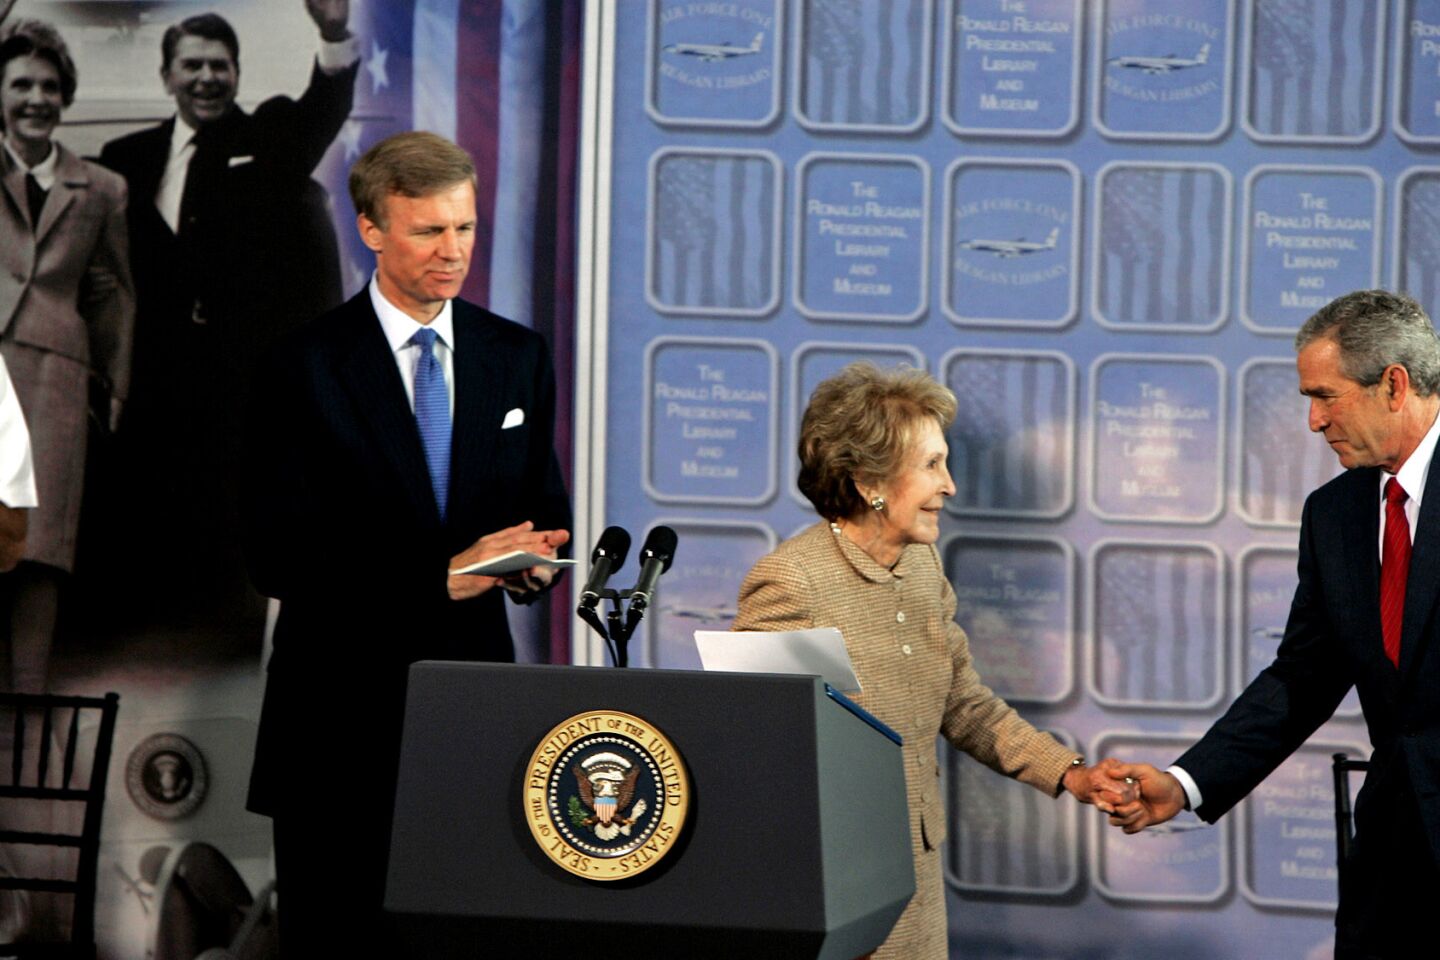 Nancy Reagan with President George W. Bush in 2005 at an Air Force One exhibit at the Ronald Reagan Presidential Library in Simi Valley.